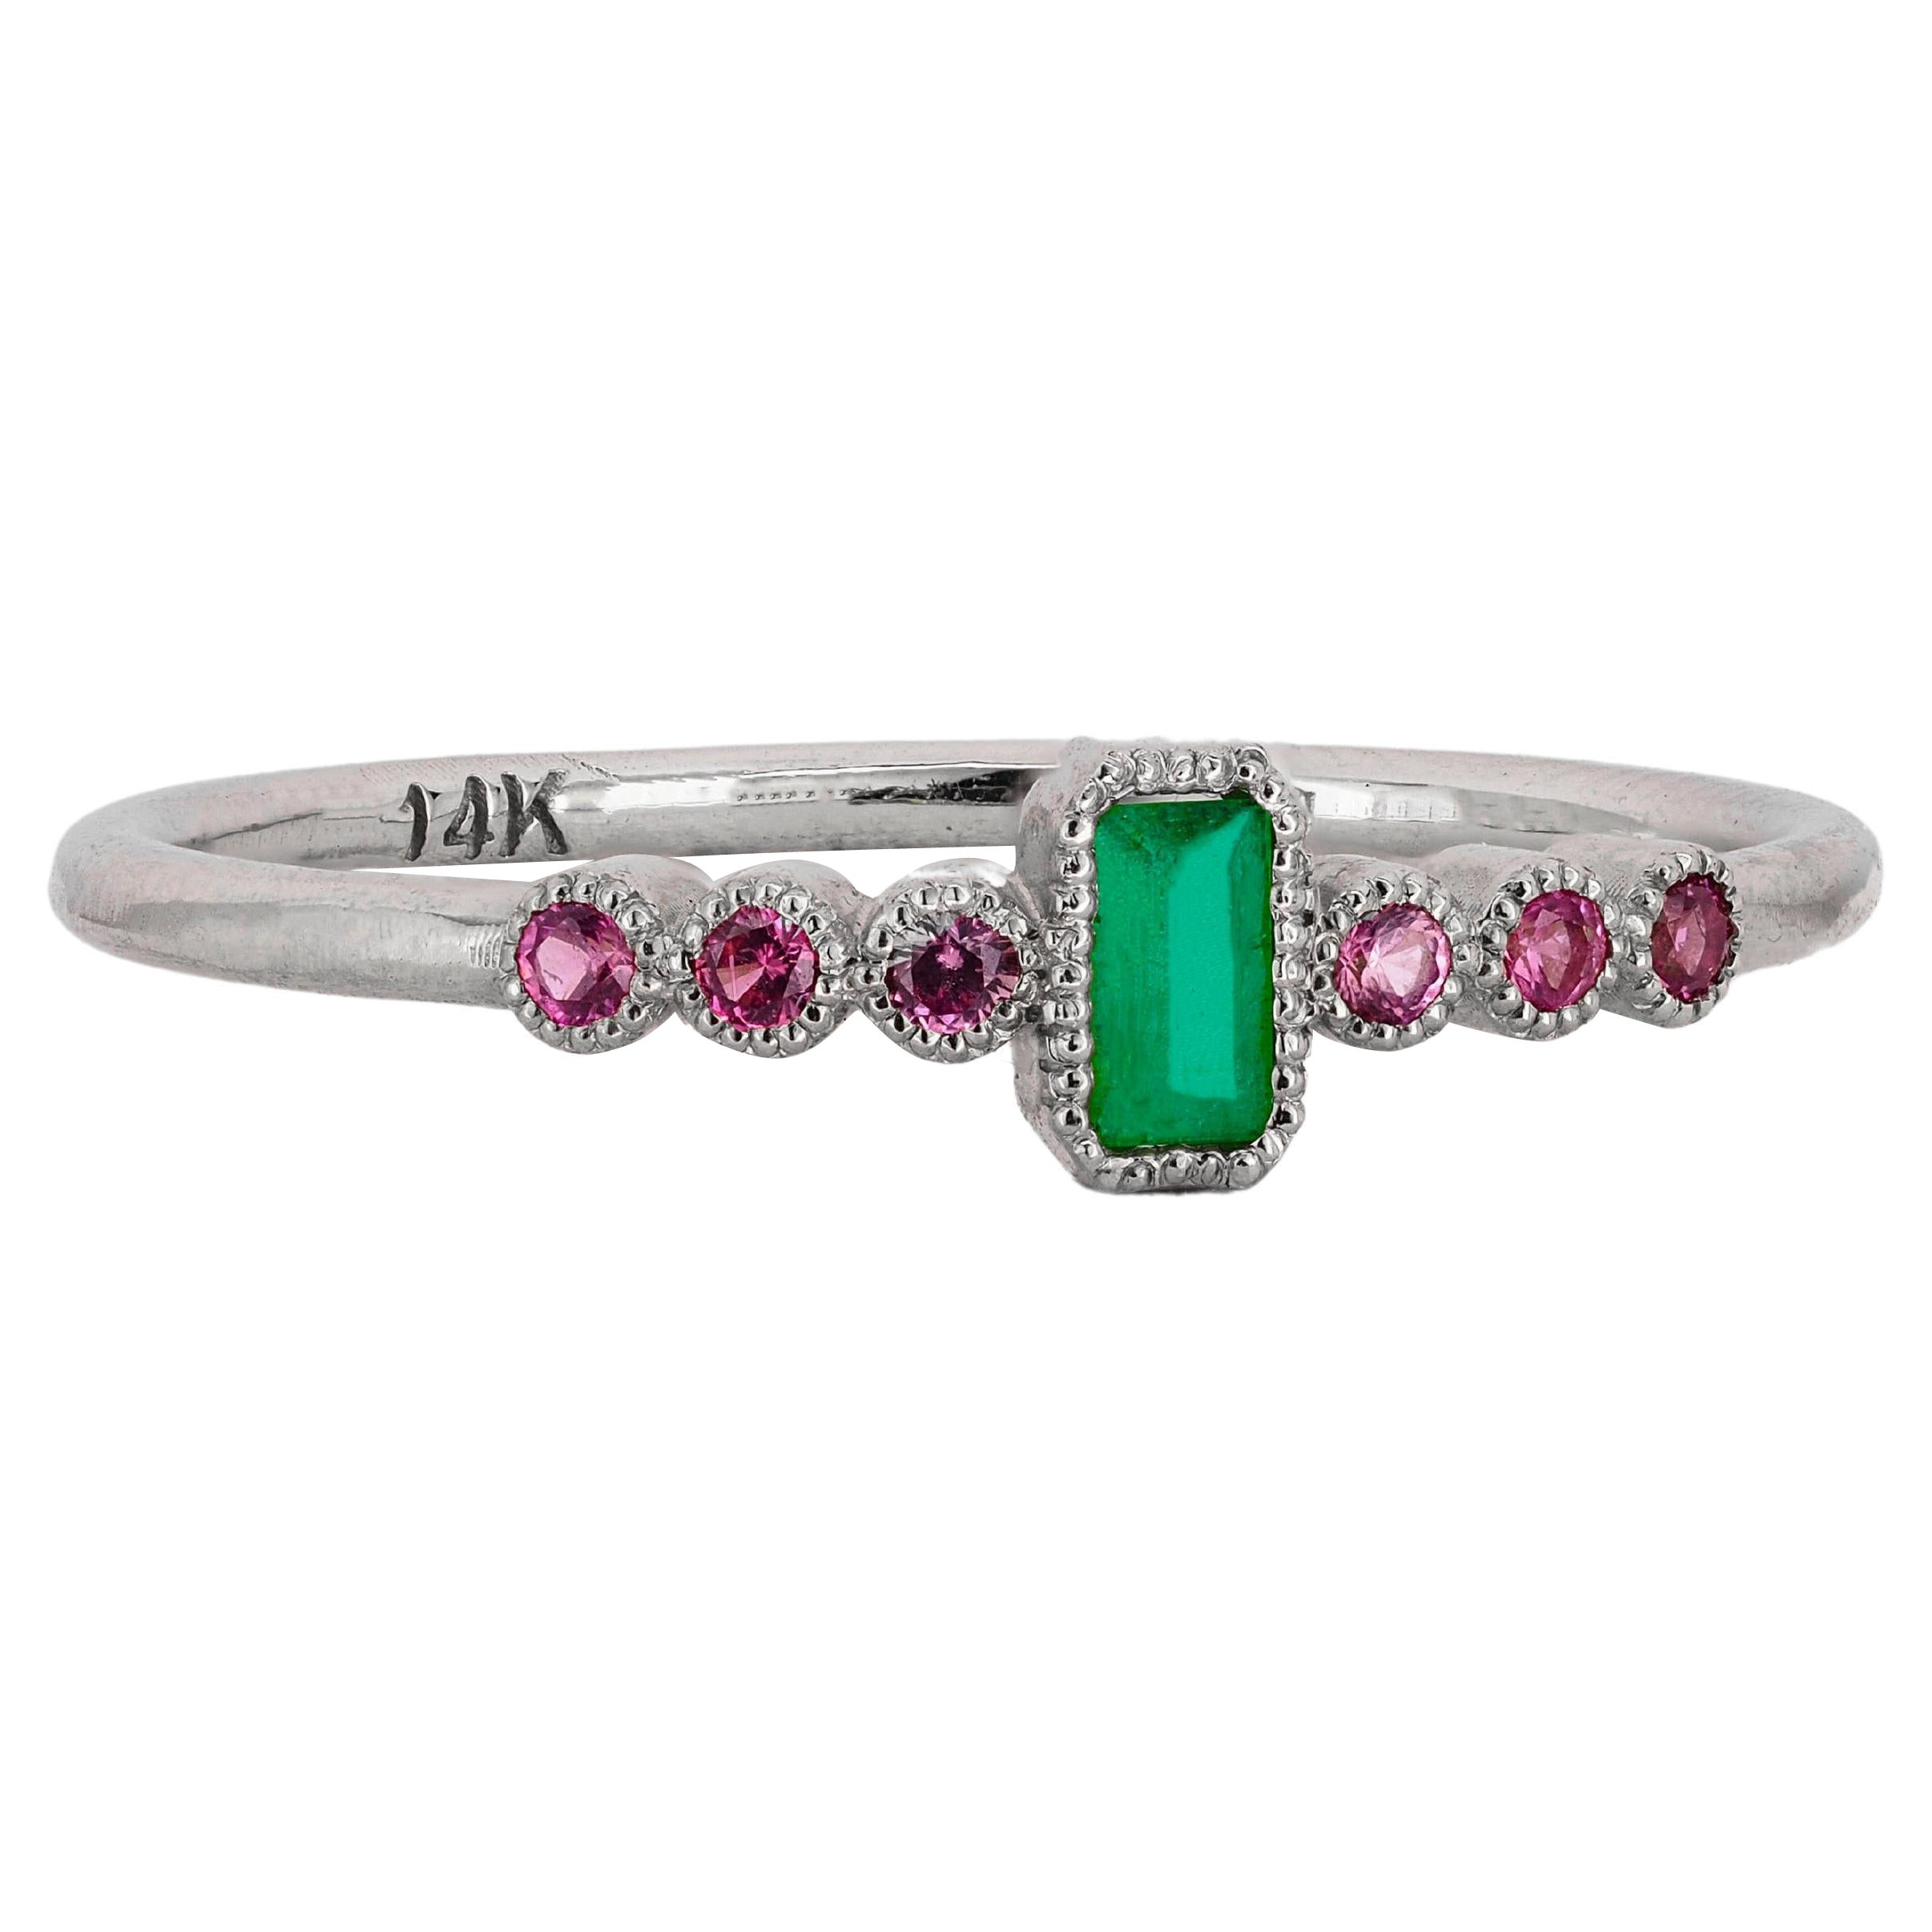 14k Gold Ring with Baguette Cut Emerald and Sapphires